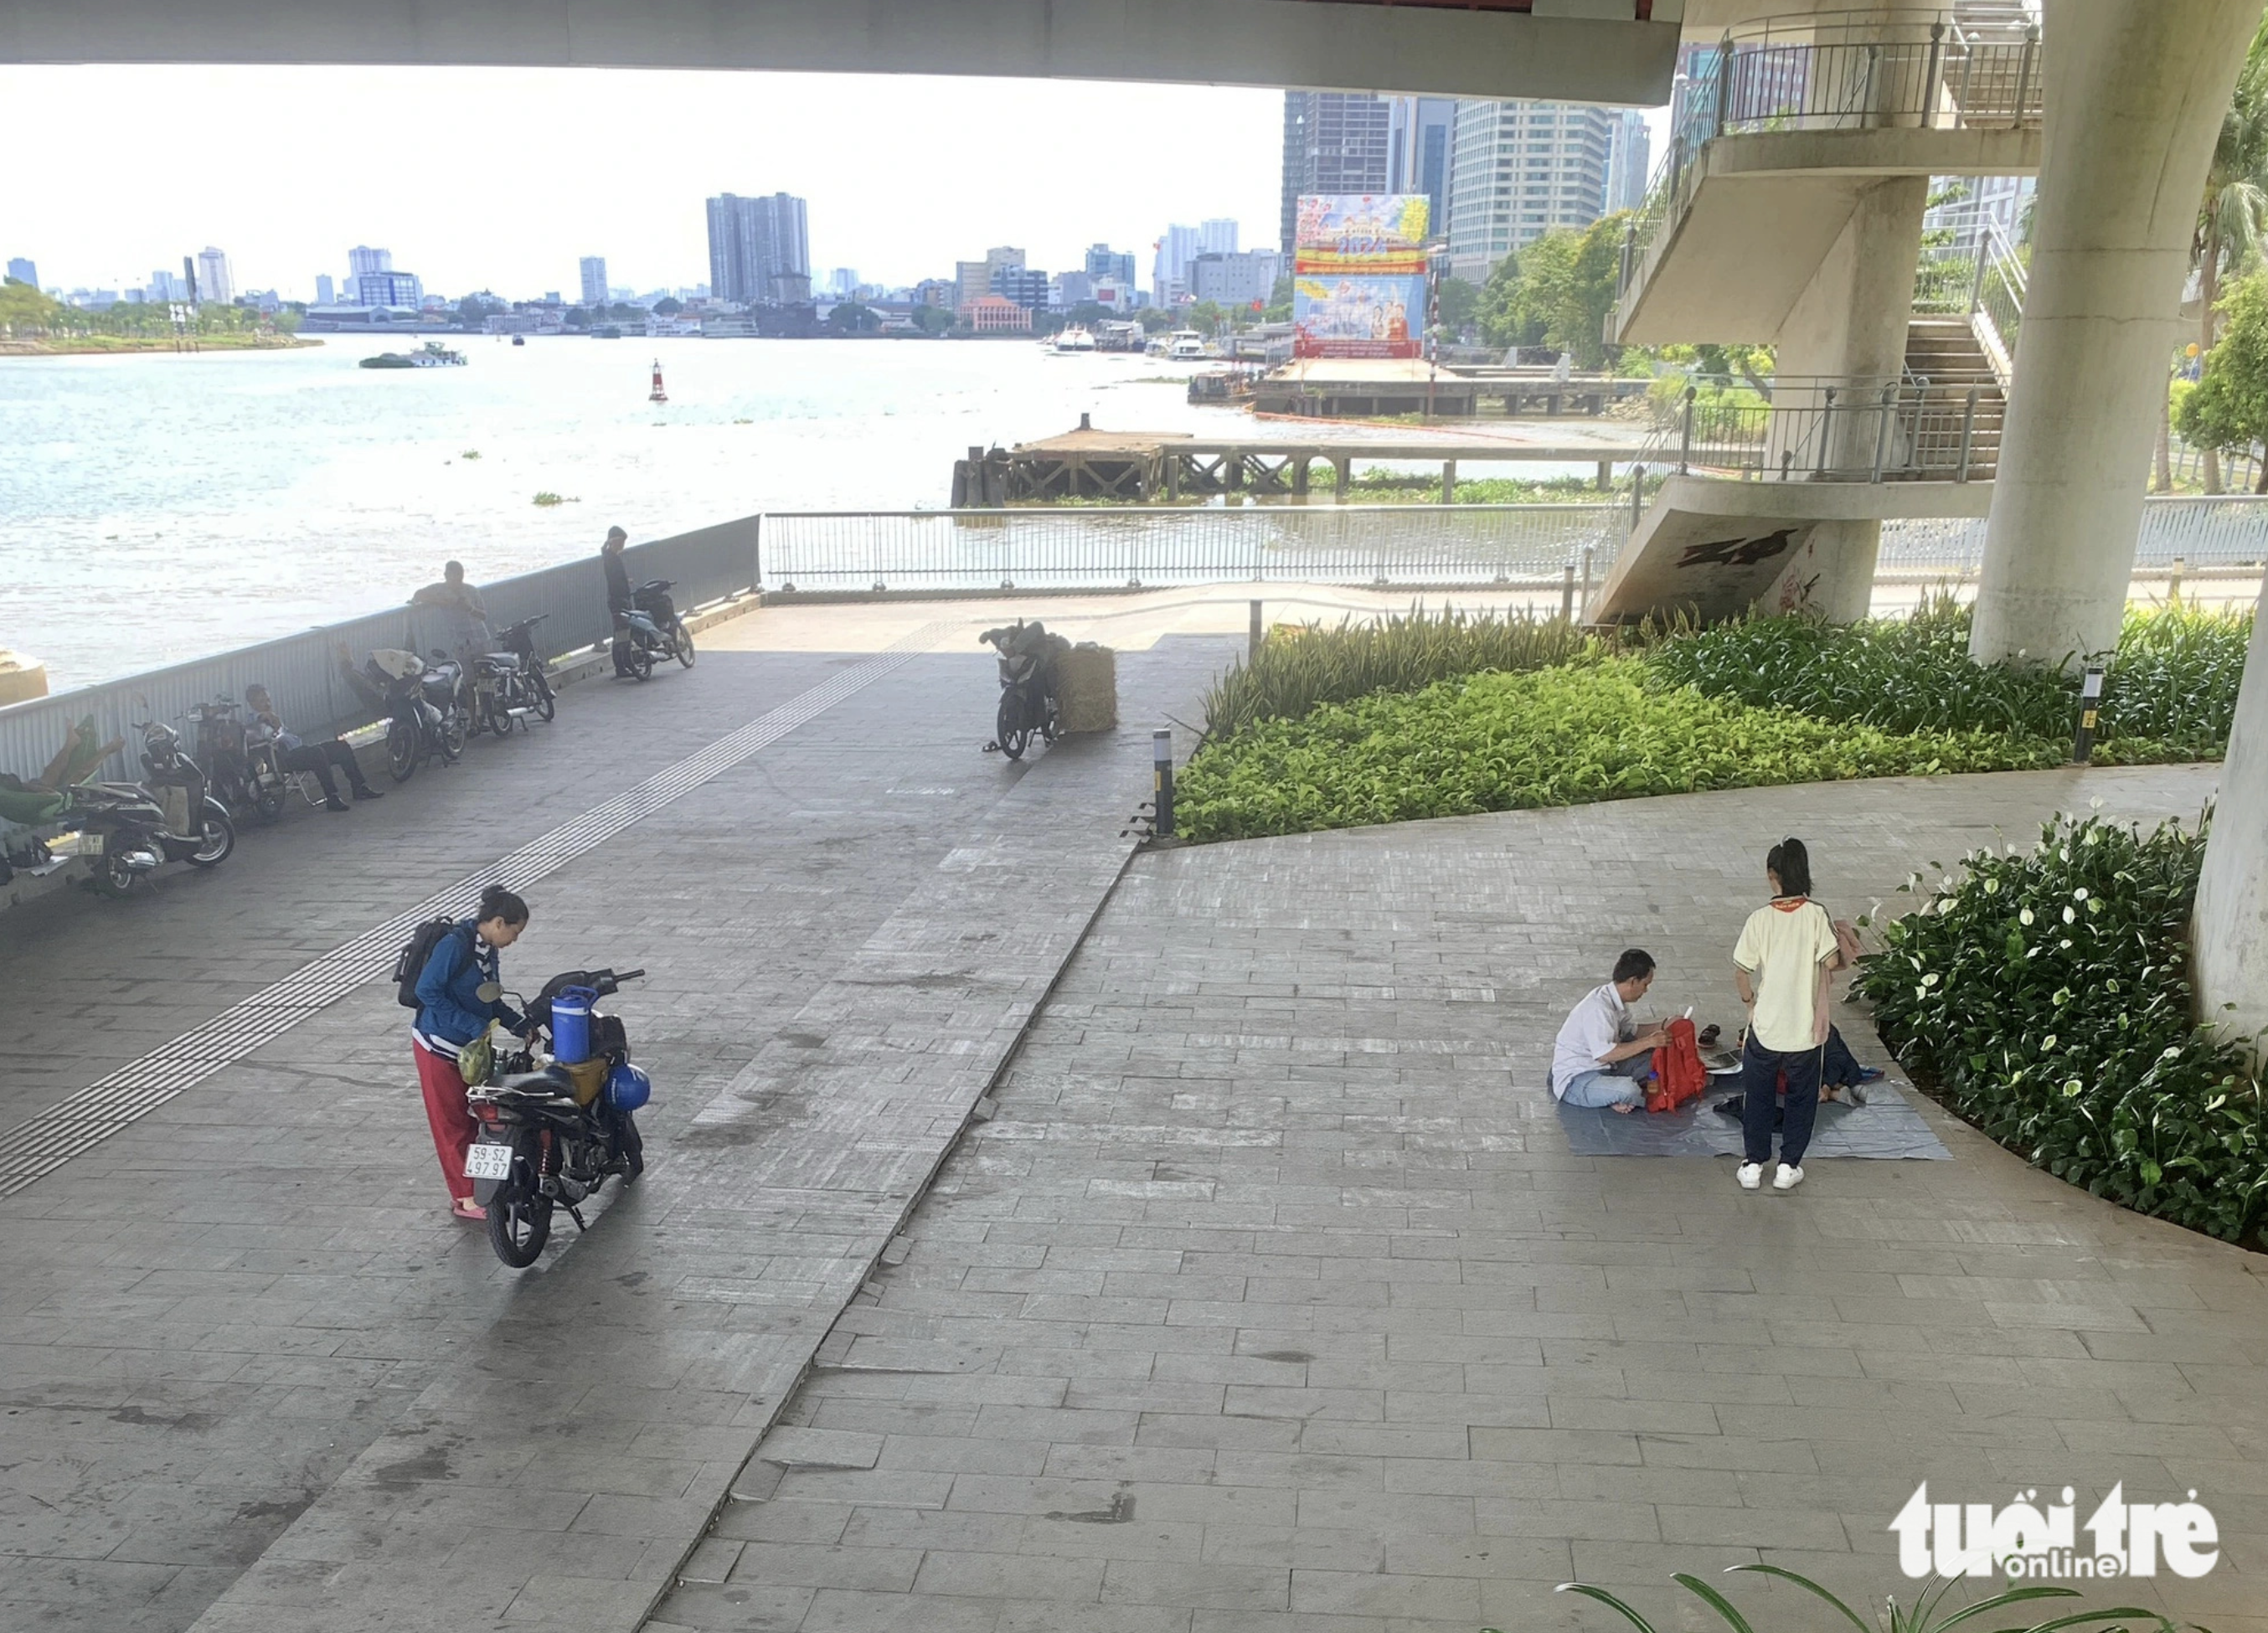 Many people spread out sleeping plastic sheets to take a nap under Ba Son Bridge in District 1, Ho Chi Minh City to shun sizzling temperatures. Photo: T.T.D. / Tuoi Tre